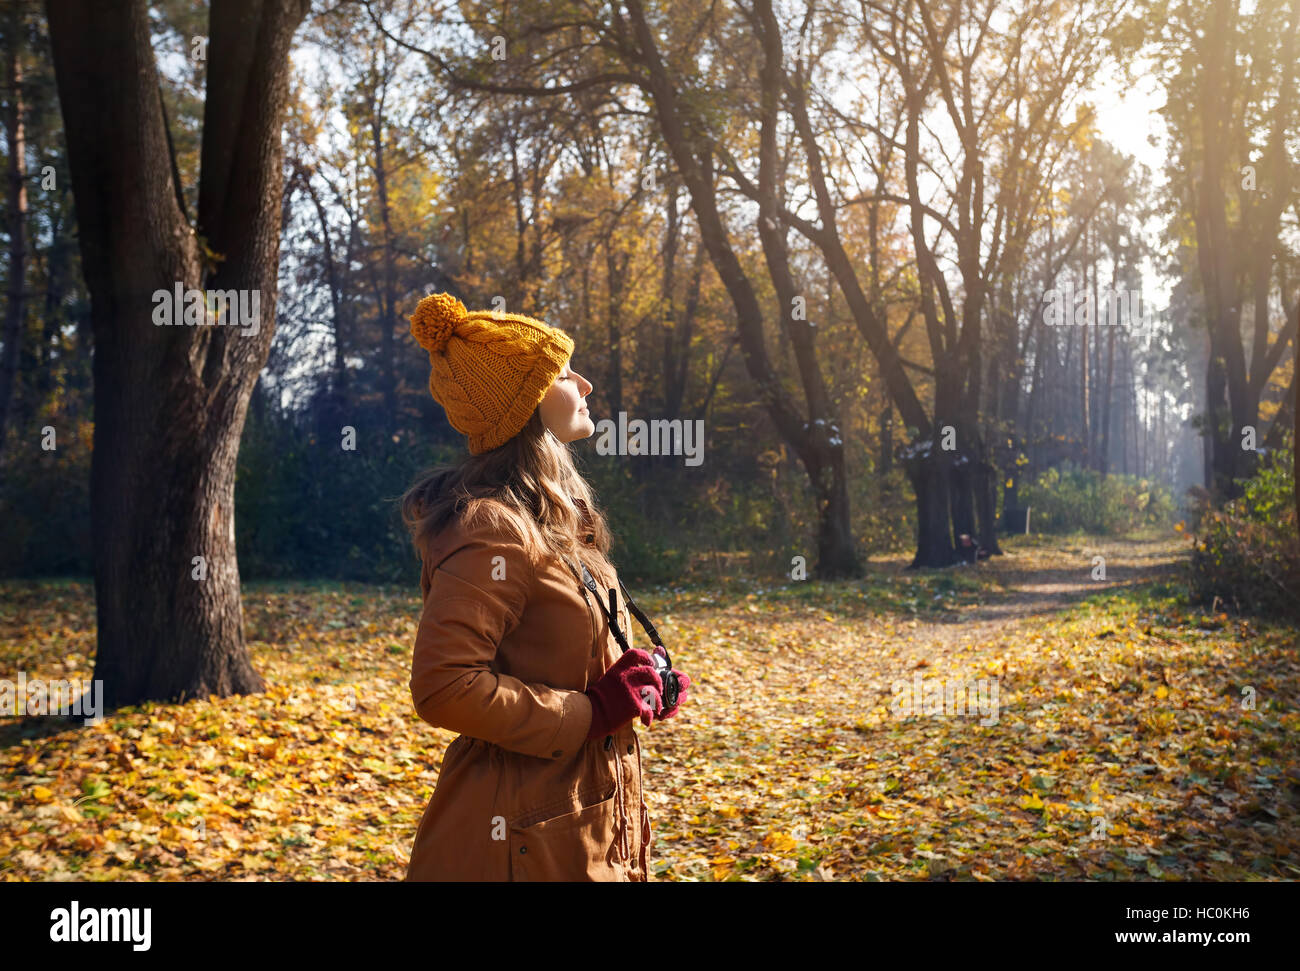 Woman in brown jacket and yellow hat taking a picture with old vintage photo camera at autumn forest Stock Photo